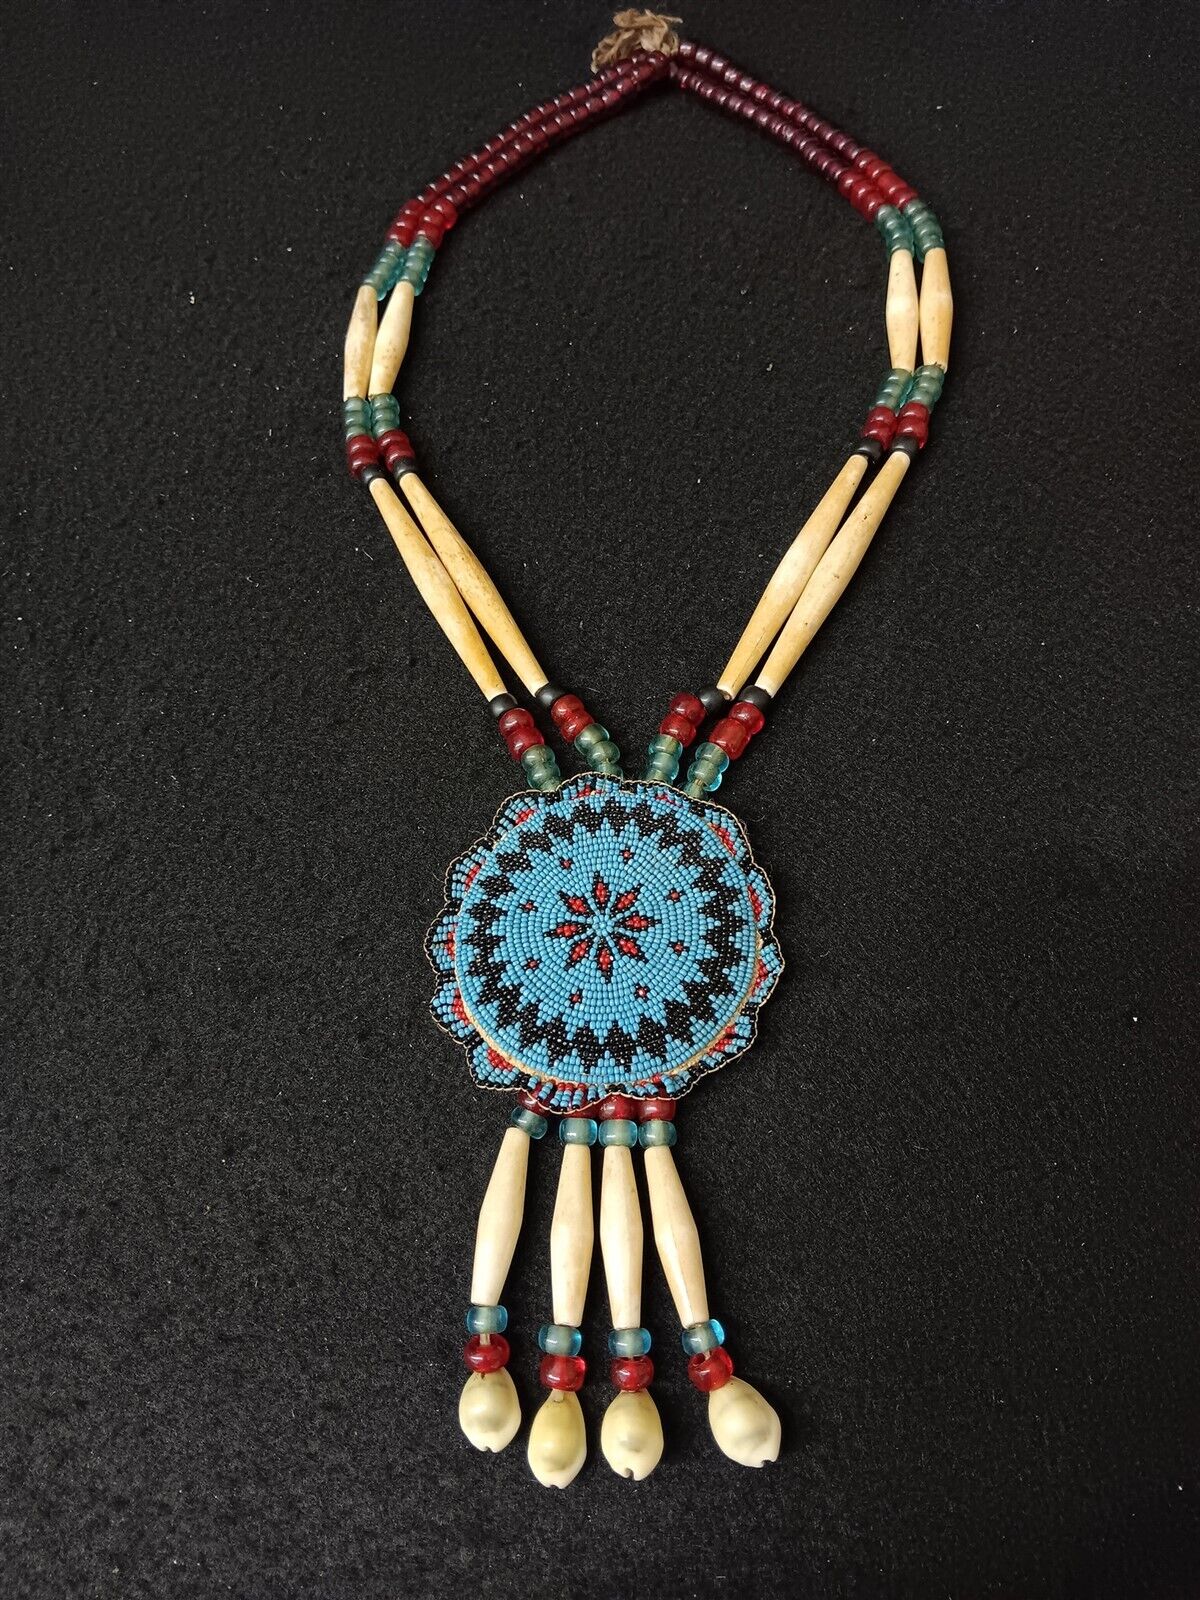 NICE HAND CRAFTED CUT BEADED STAR DESIGN ROSETTE NATIVE AMERICAN INDIAN NECKLACE